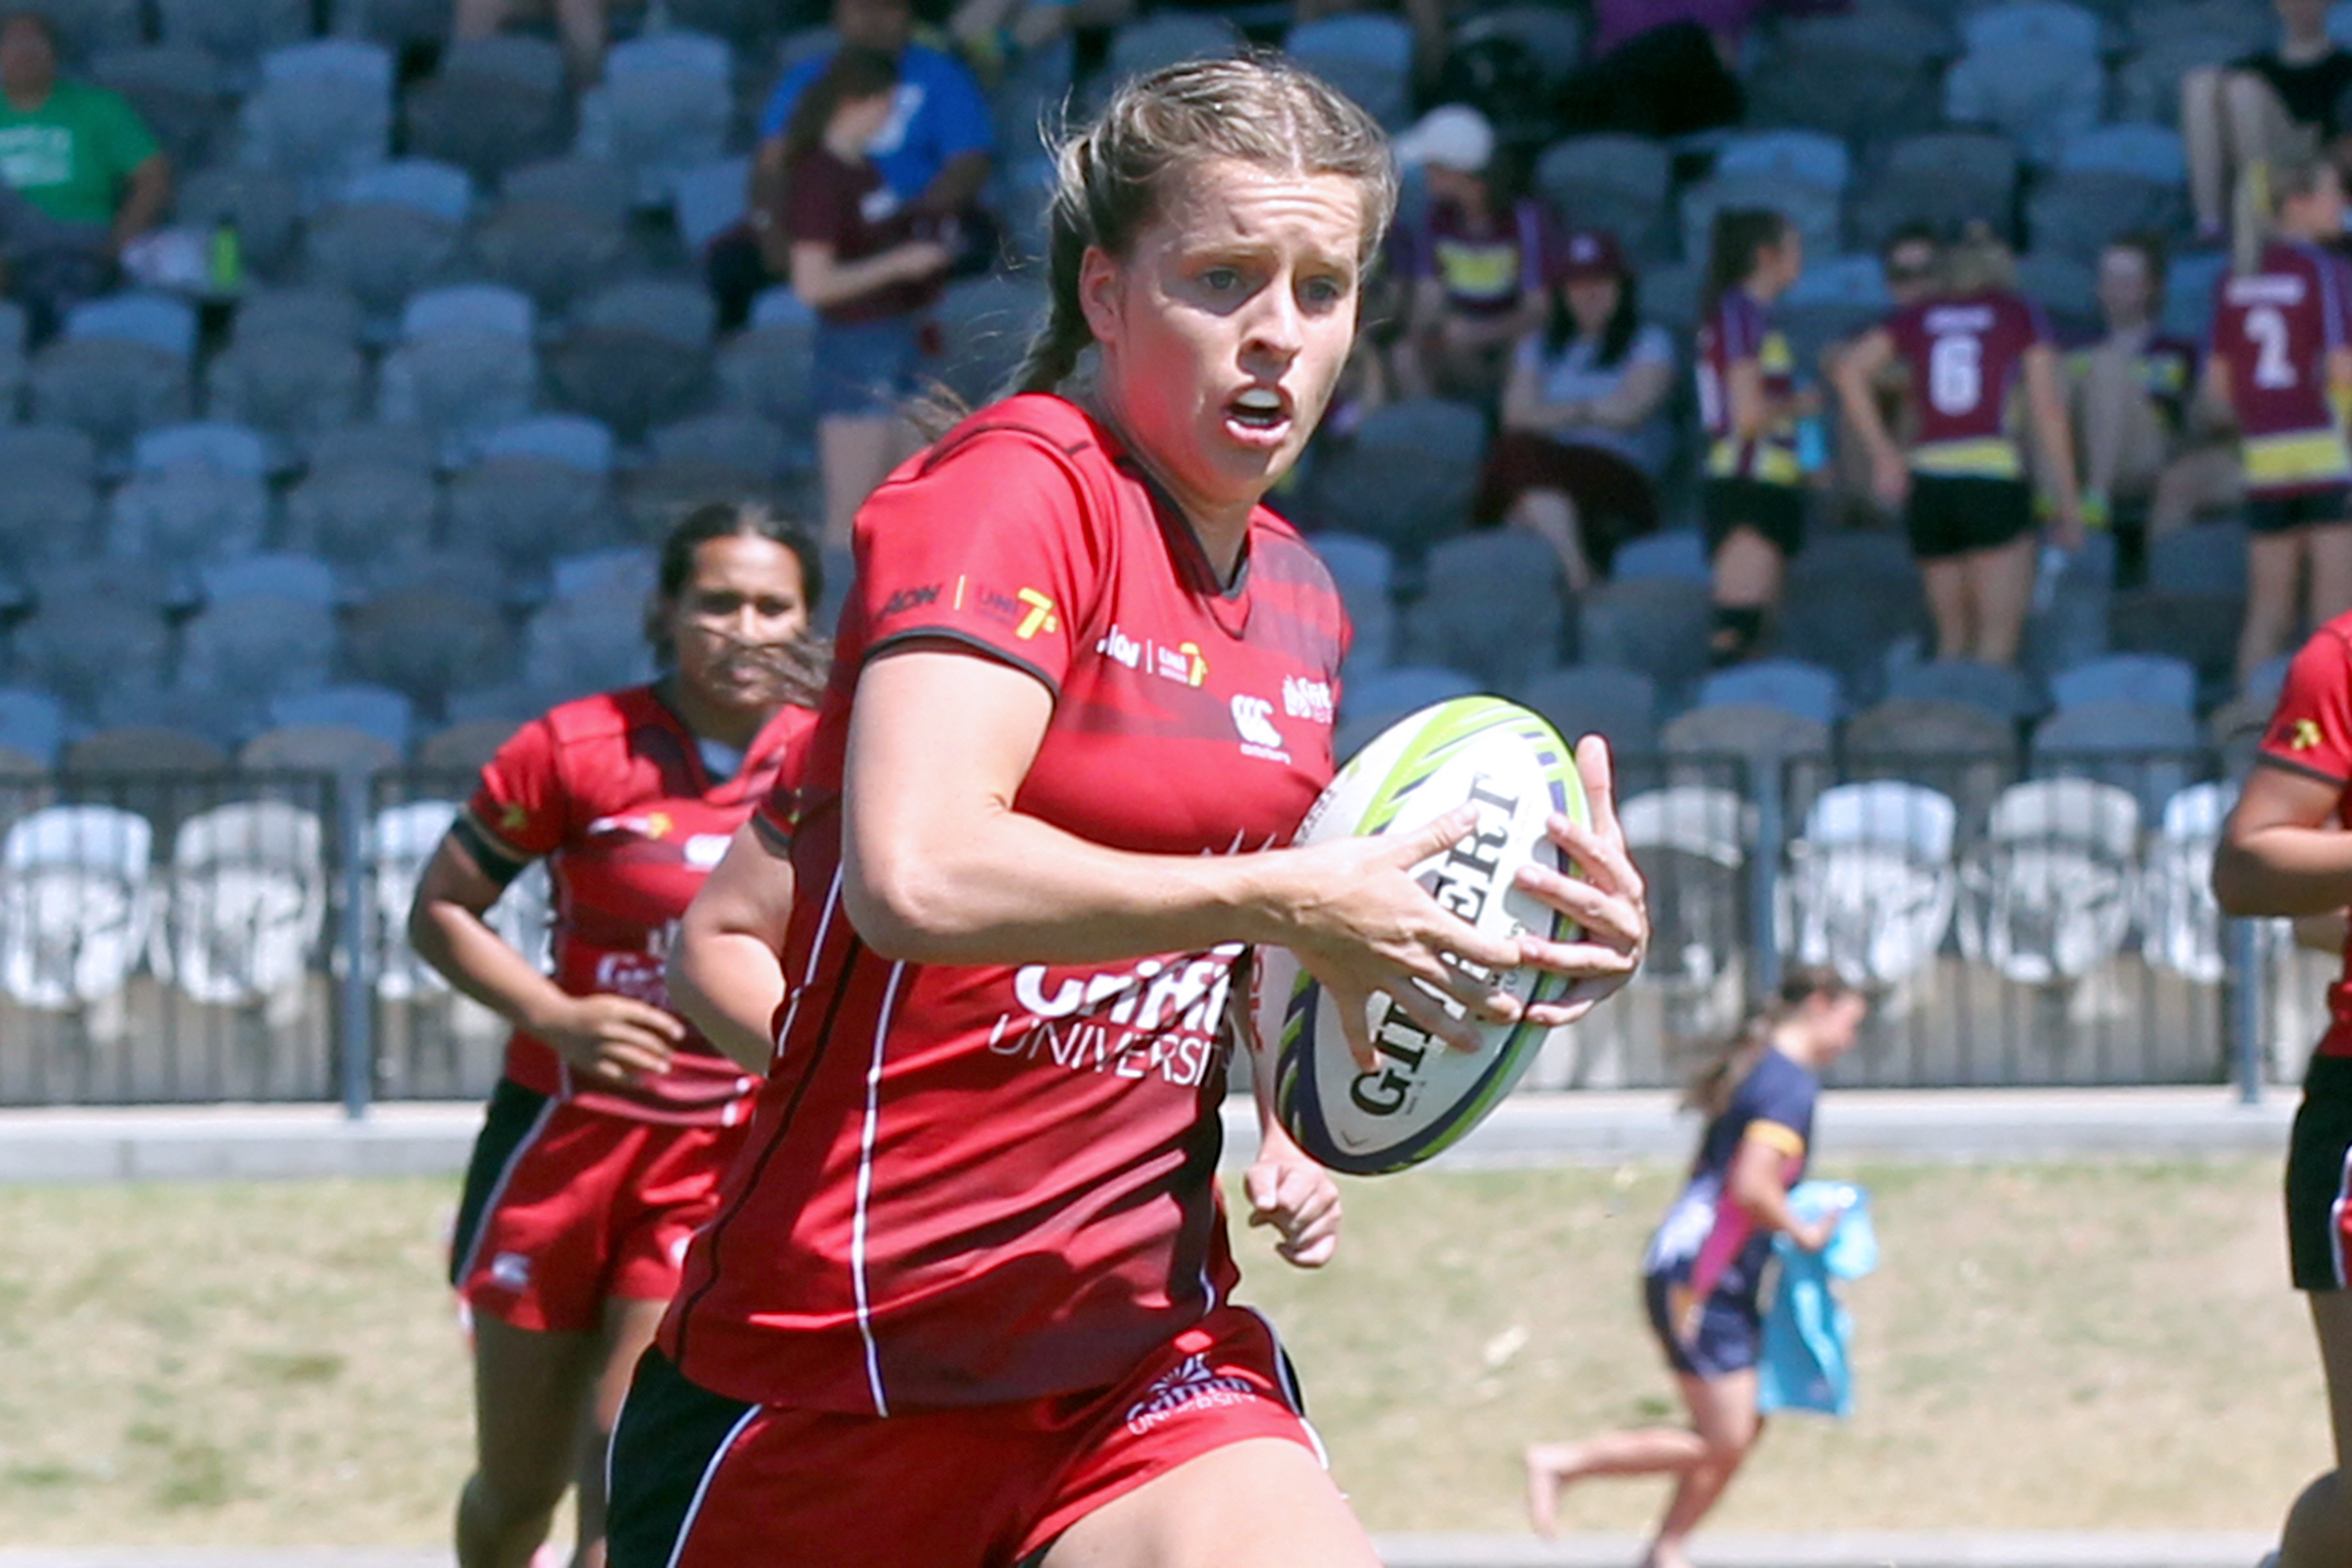 Sport management student, Lauren Brown, will again captain Griffith at the Aon Uni 7s this weekend.